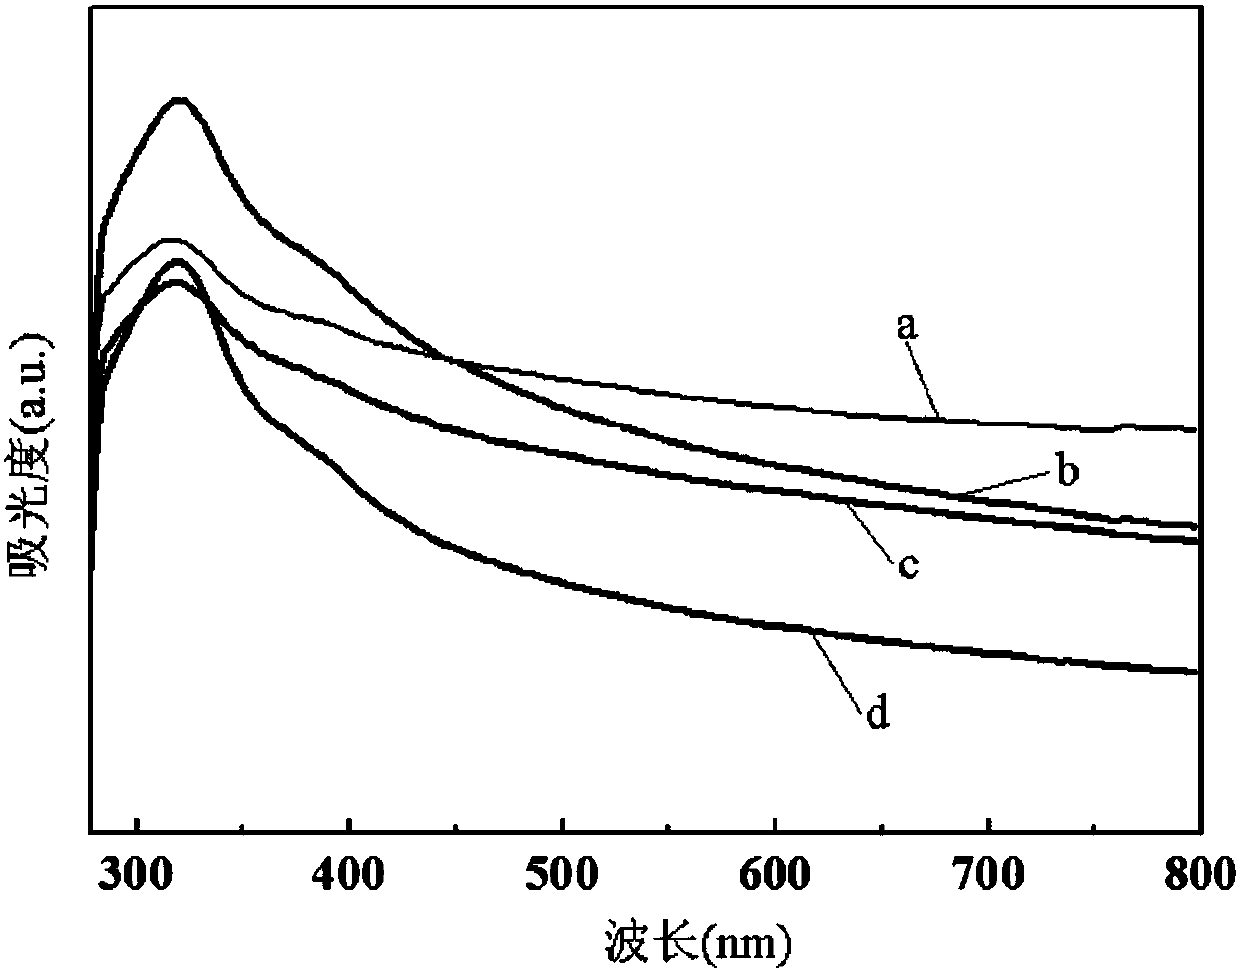 Preparation method and application of crumpled graphite phase carbon nitride